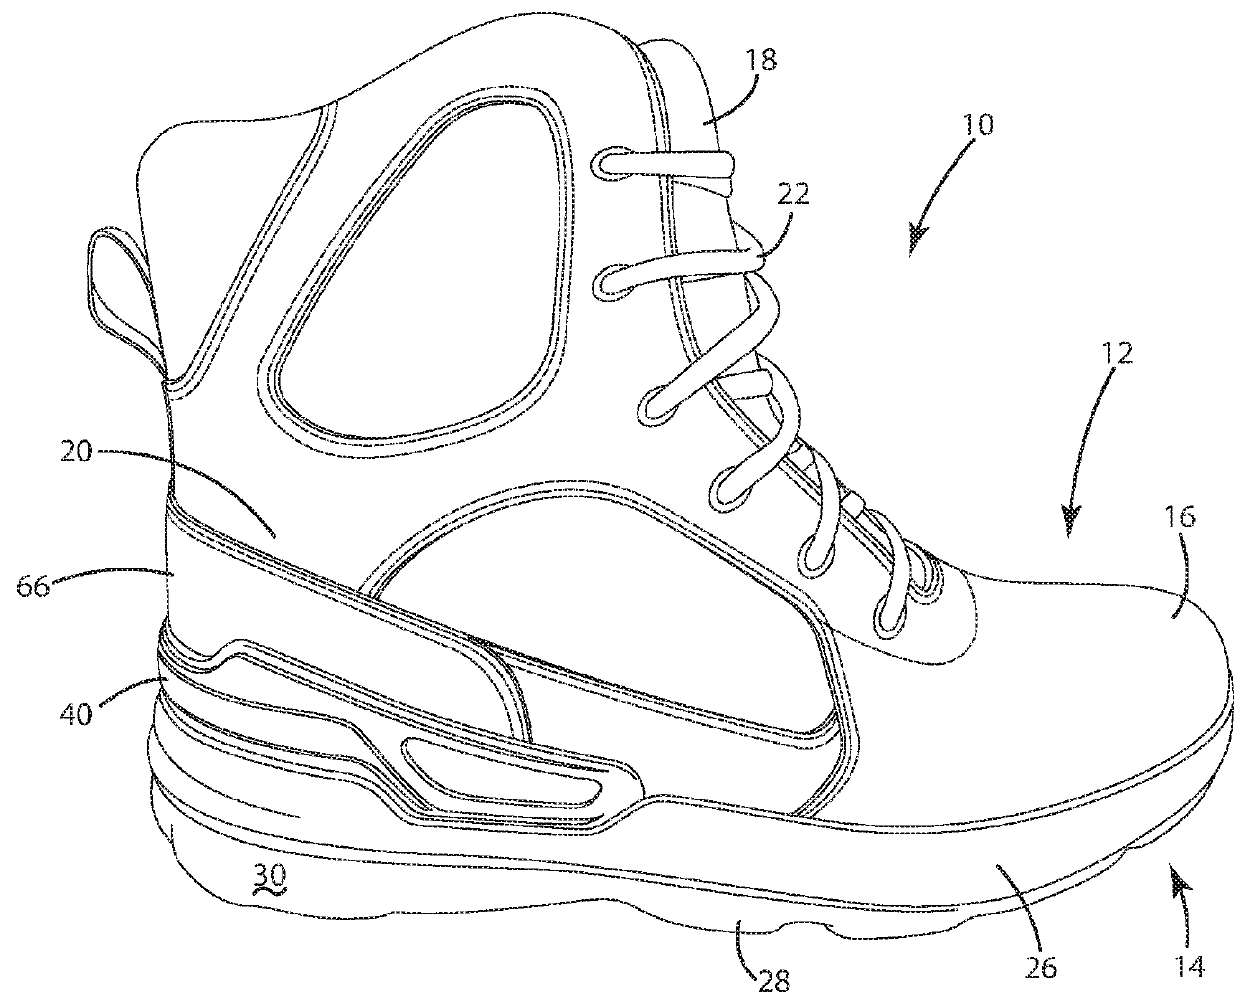 Footwear construction with heel support assembly